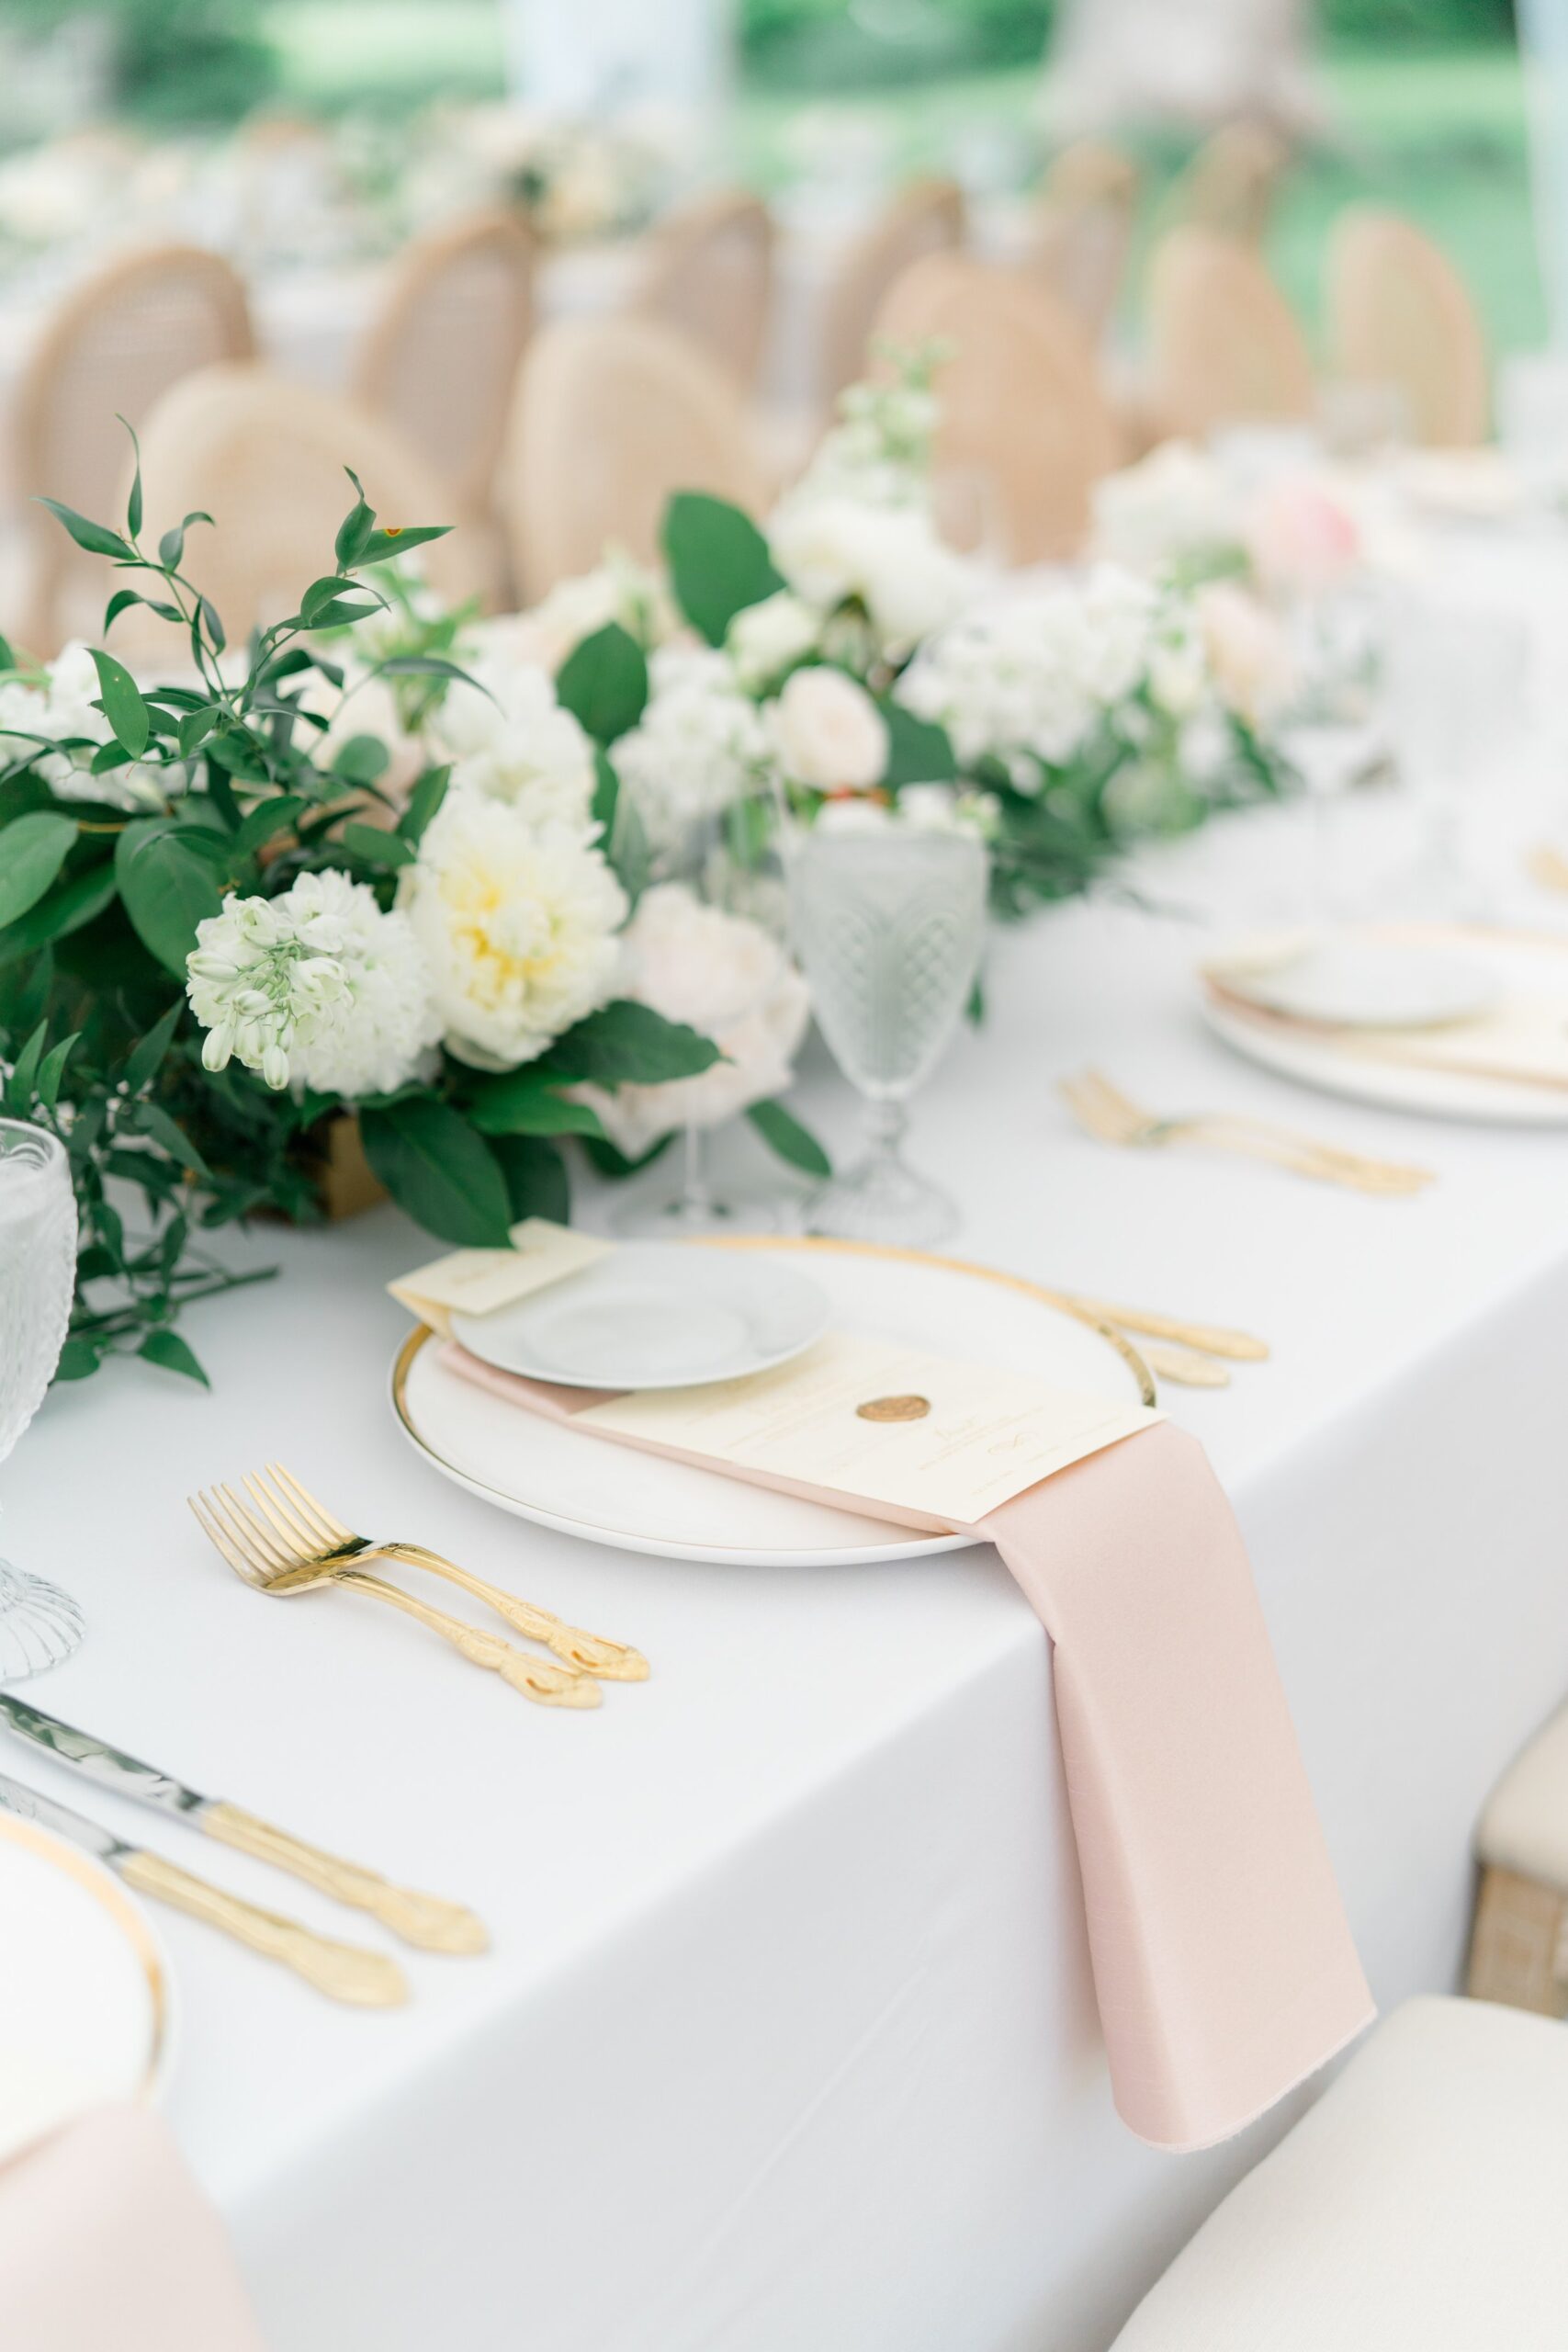 Pale pink table napkins with golden utensils and gold rimmed plates.